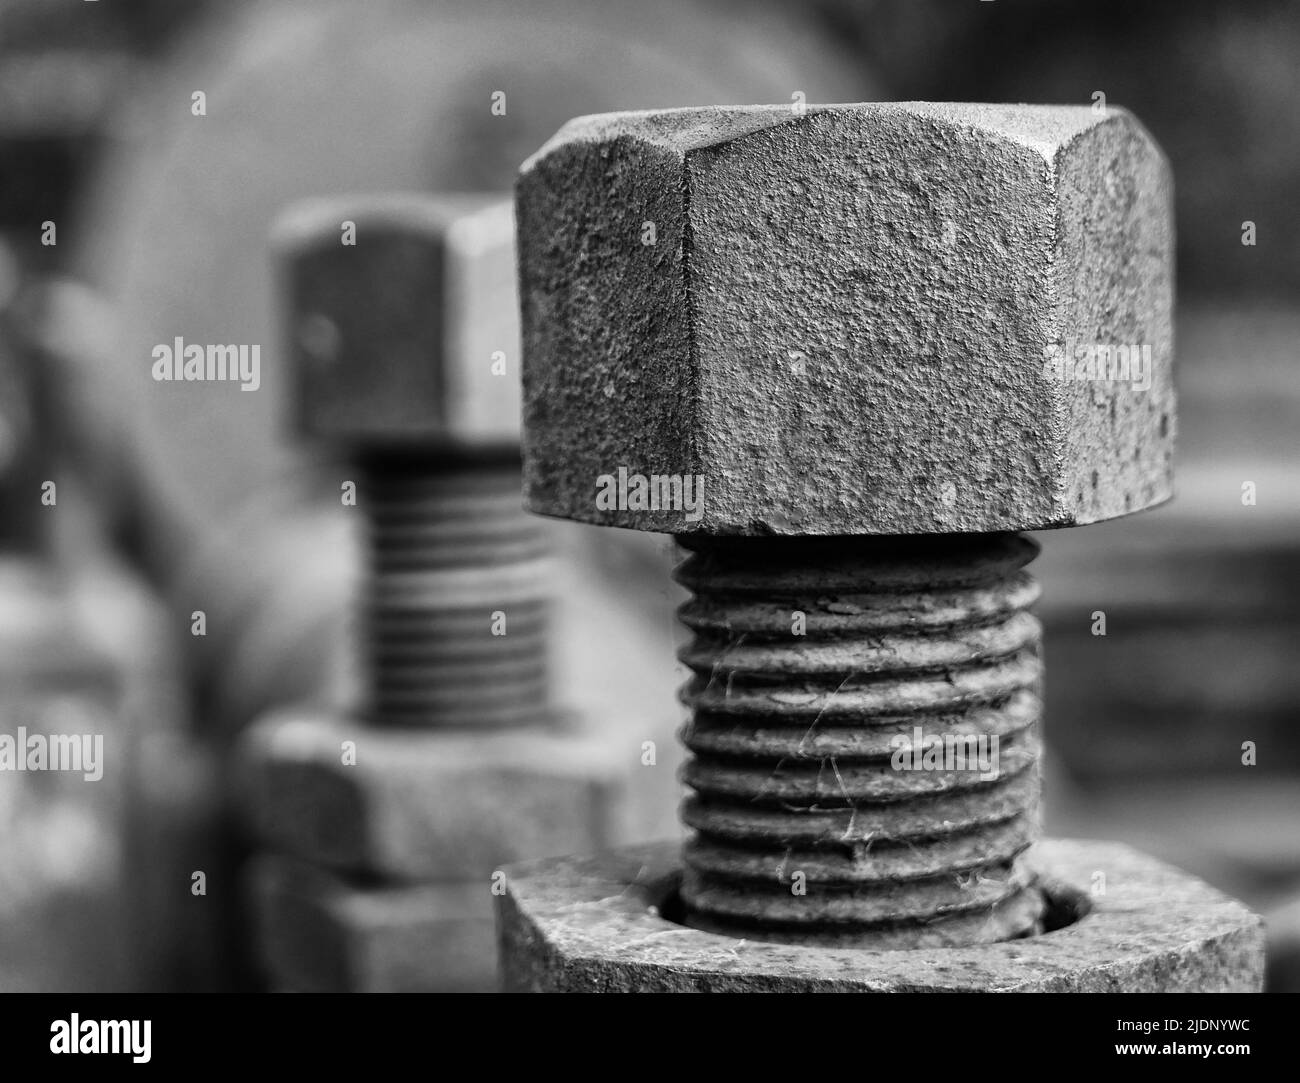 Black and white close up of a nut and bolt partly unscewed Stock Photo